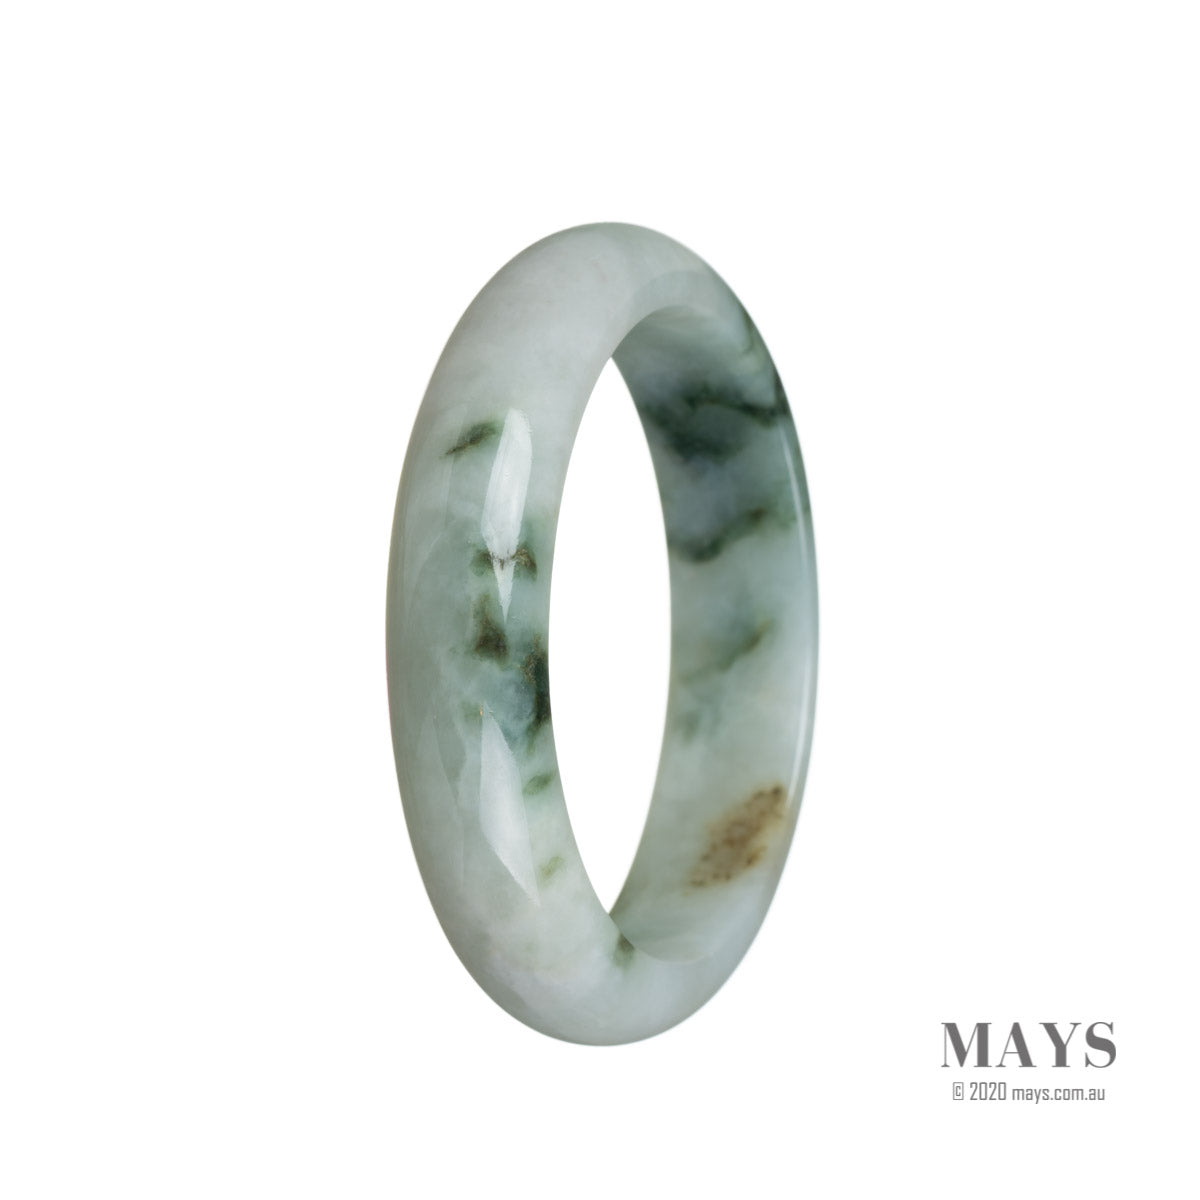 A beautiful green Burma Jade bangle with a half moon design, made from high-quality Real Grade A Jade. Perfect for adding an elegant touch to any outfit.